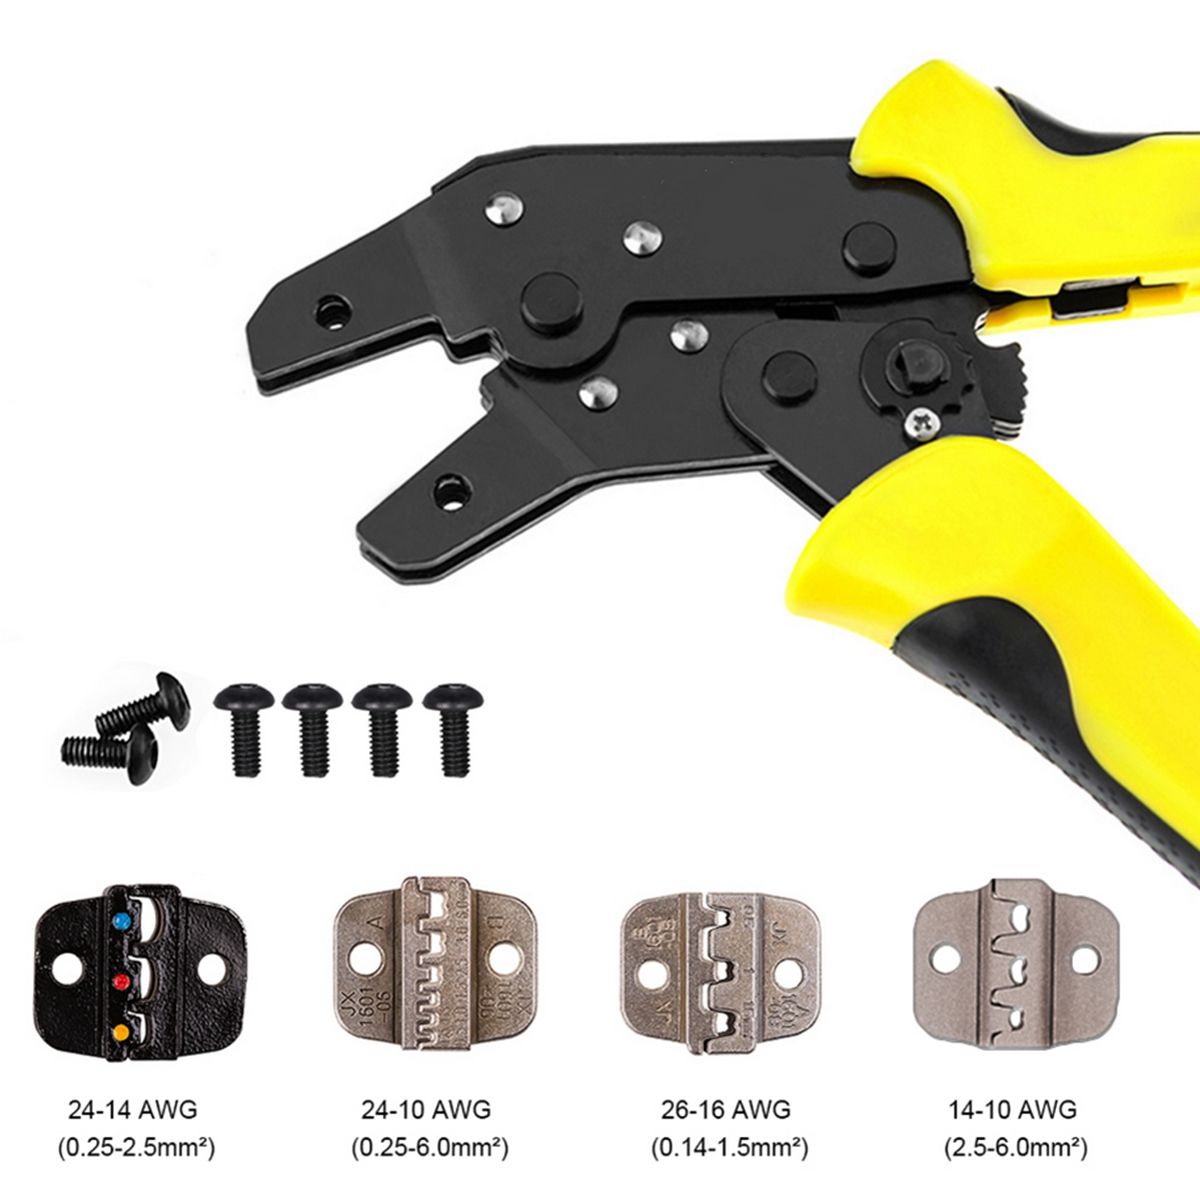 JX-D4301-Wire-Crimpers-Engineering-Ratcheting-Terminal-Crimping-Pliers-Tool-Set-1193651